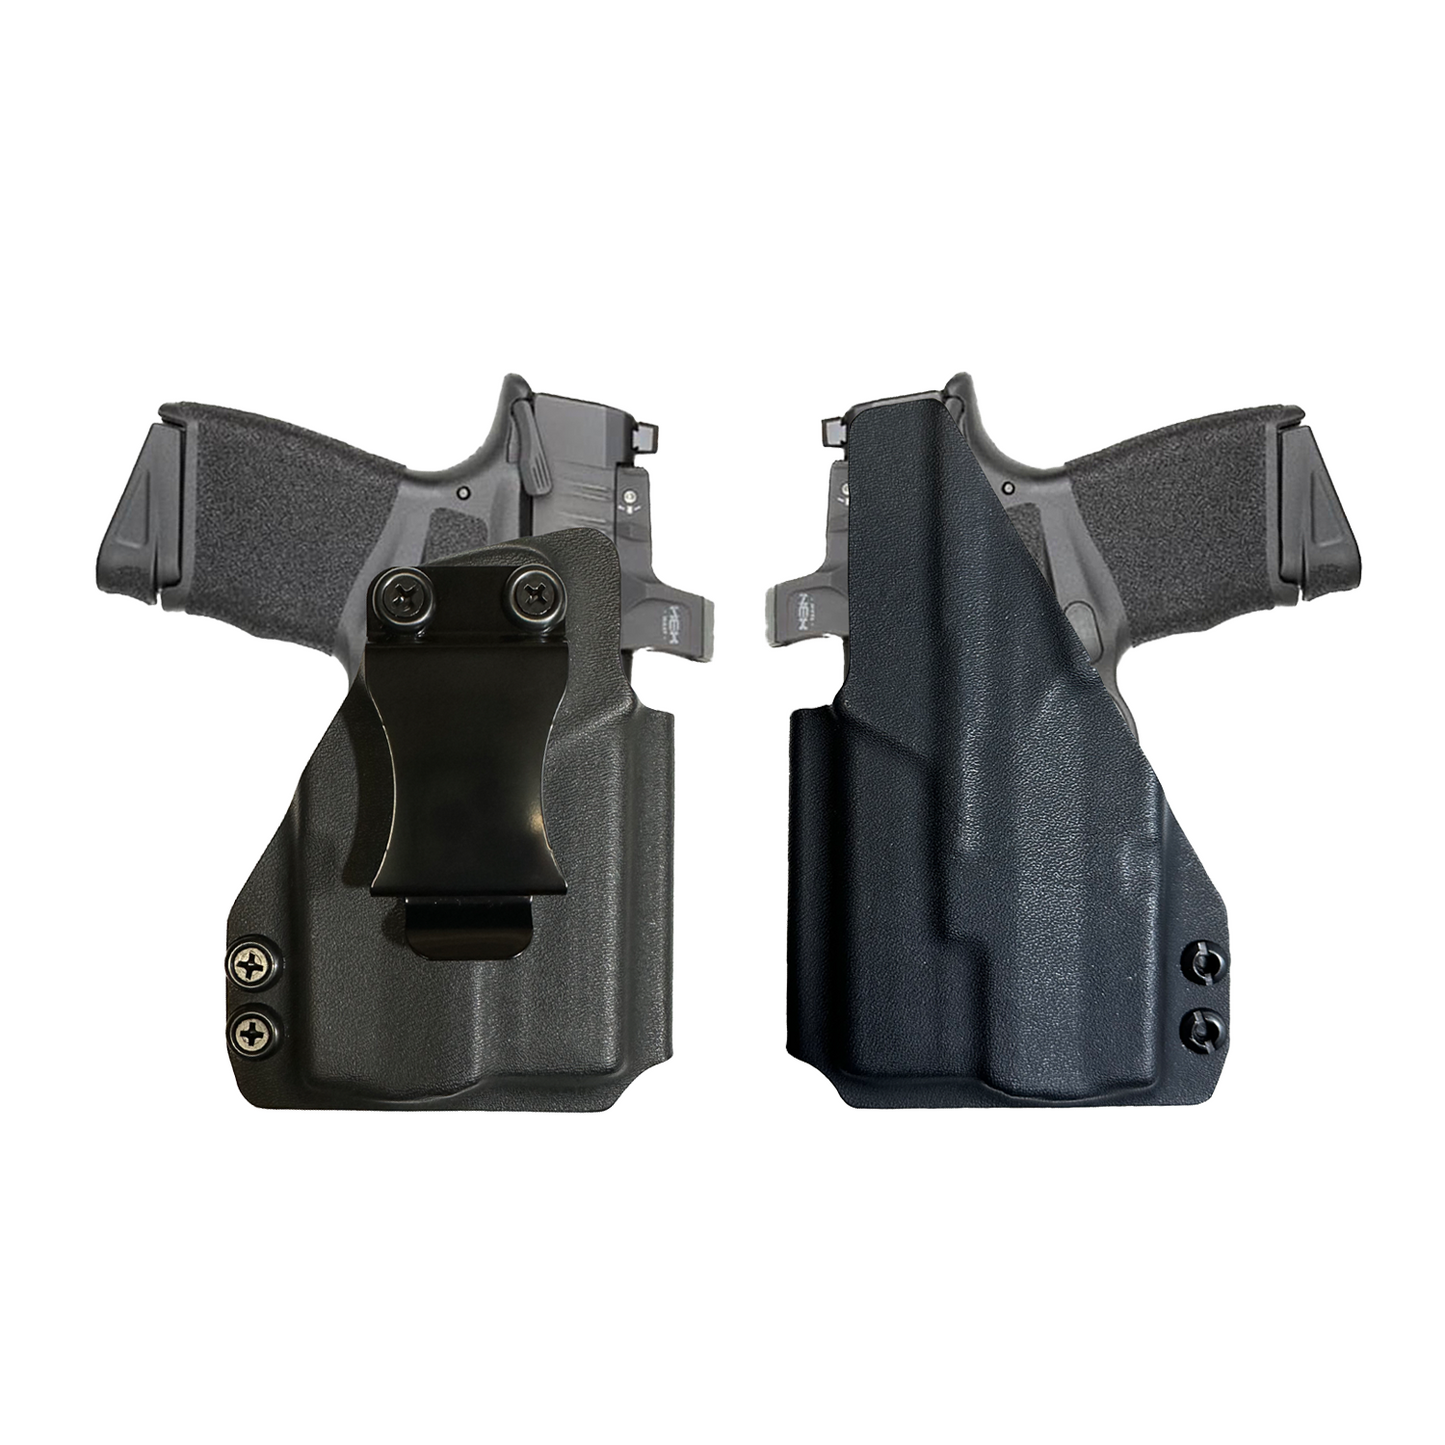 SIG P365/ P365X With TLR6 Light  IWB ( Inside The Waistband Holster)